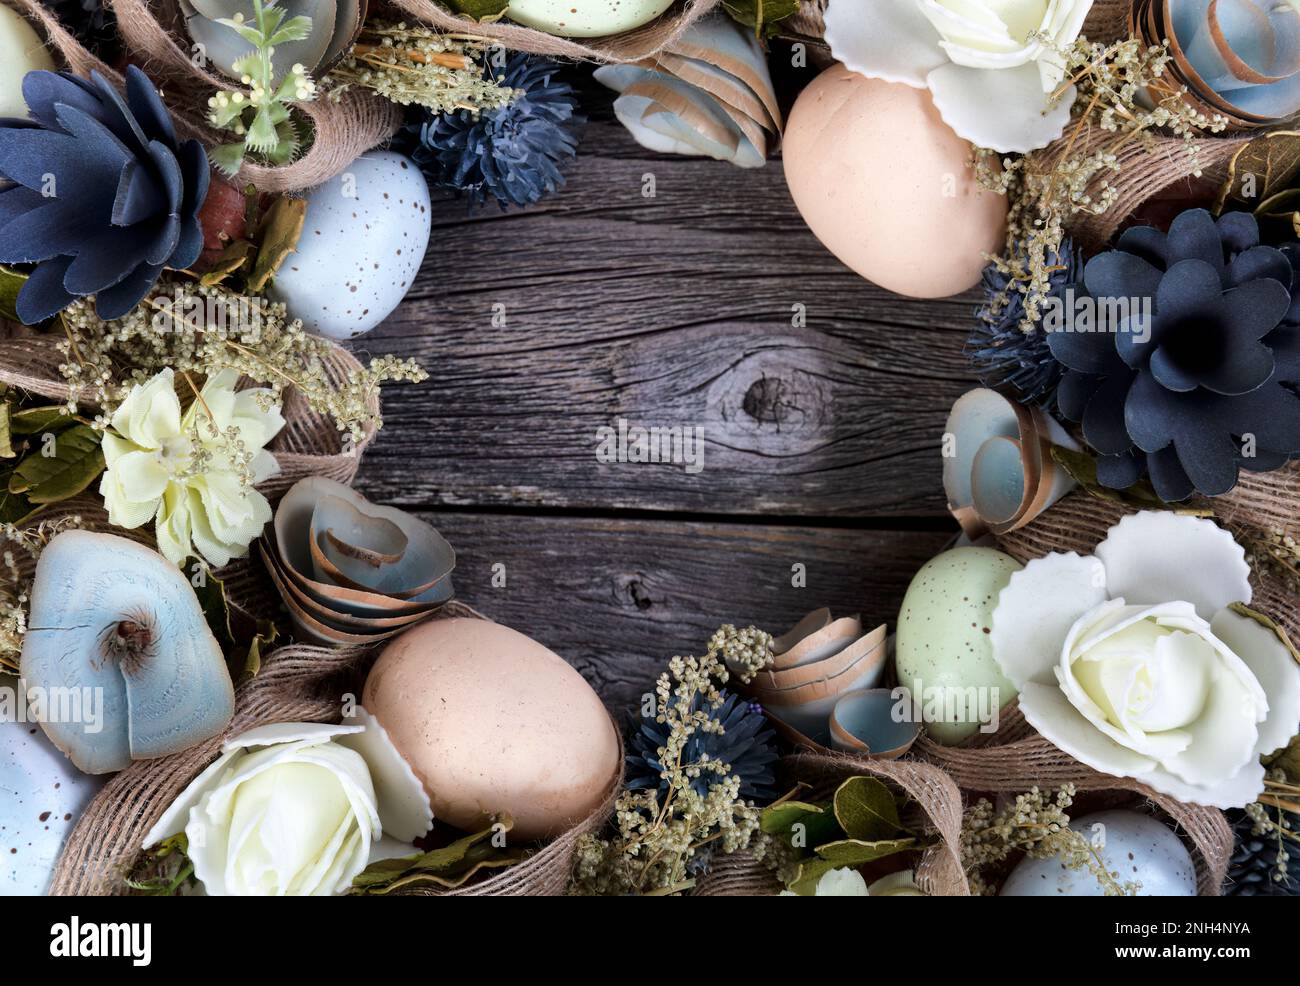 Circle border of a wreath decorated for Easter holiday concept on rustic wooden background Stock Photo